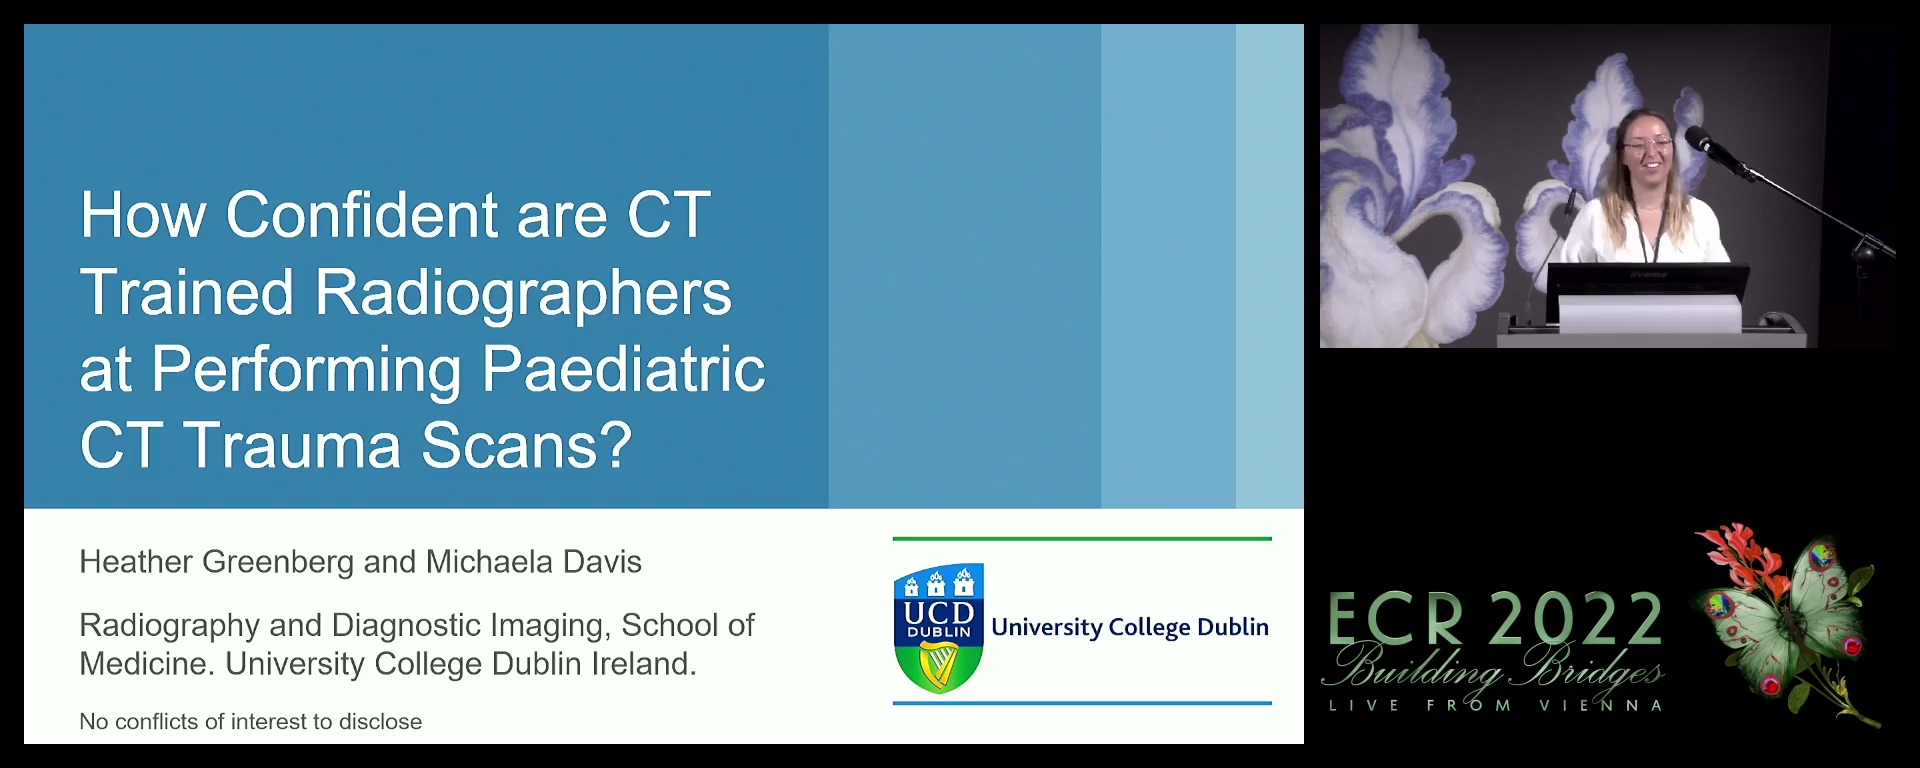 A study to investigate how confident CT trained radiographers are at performing paediatric CT trauma scans - Heather Greenberg, CARDIFF / UK